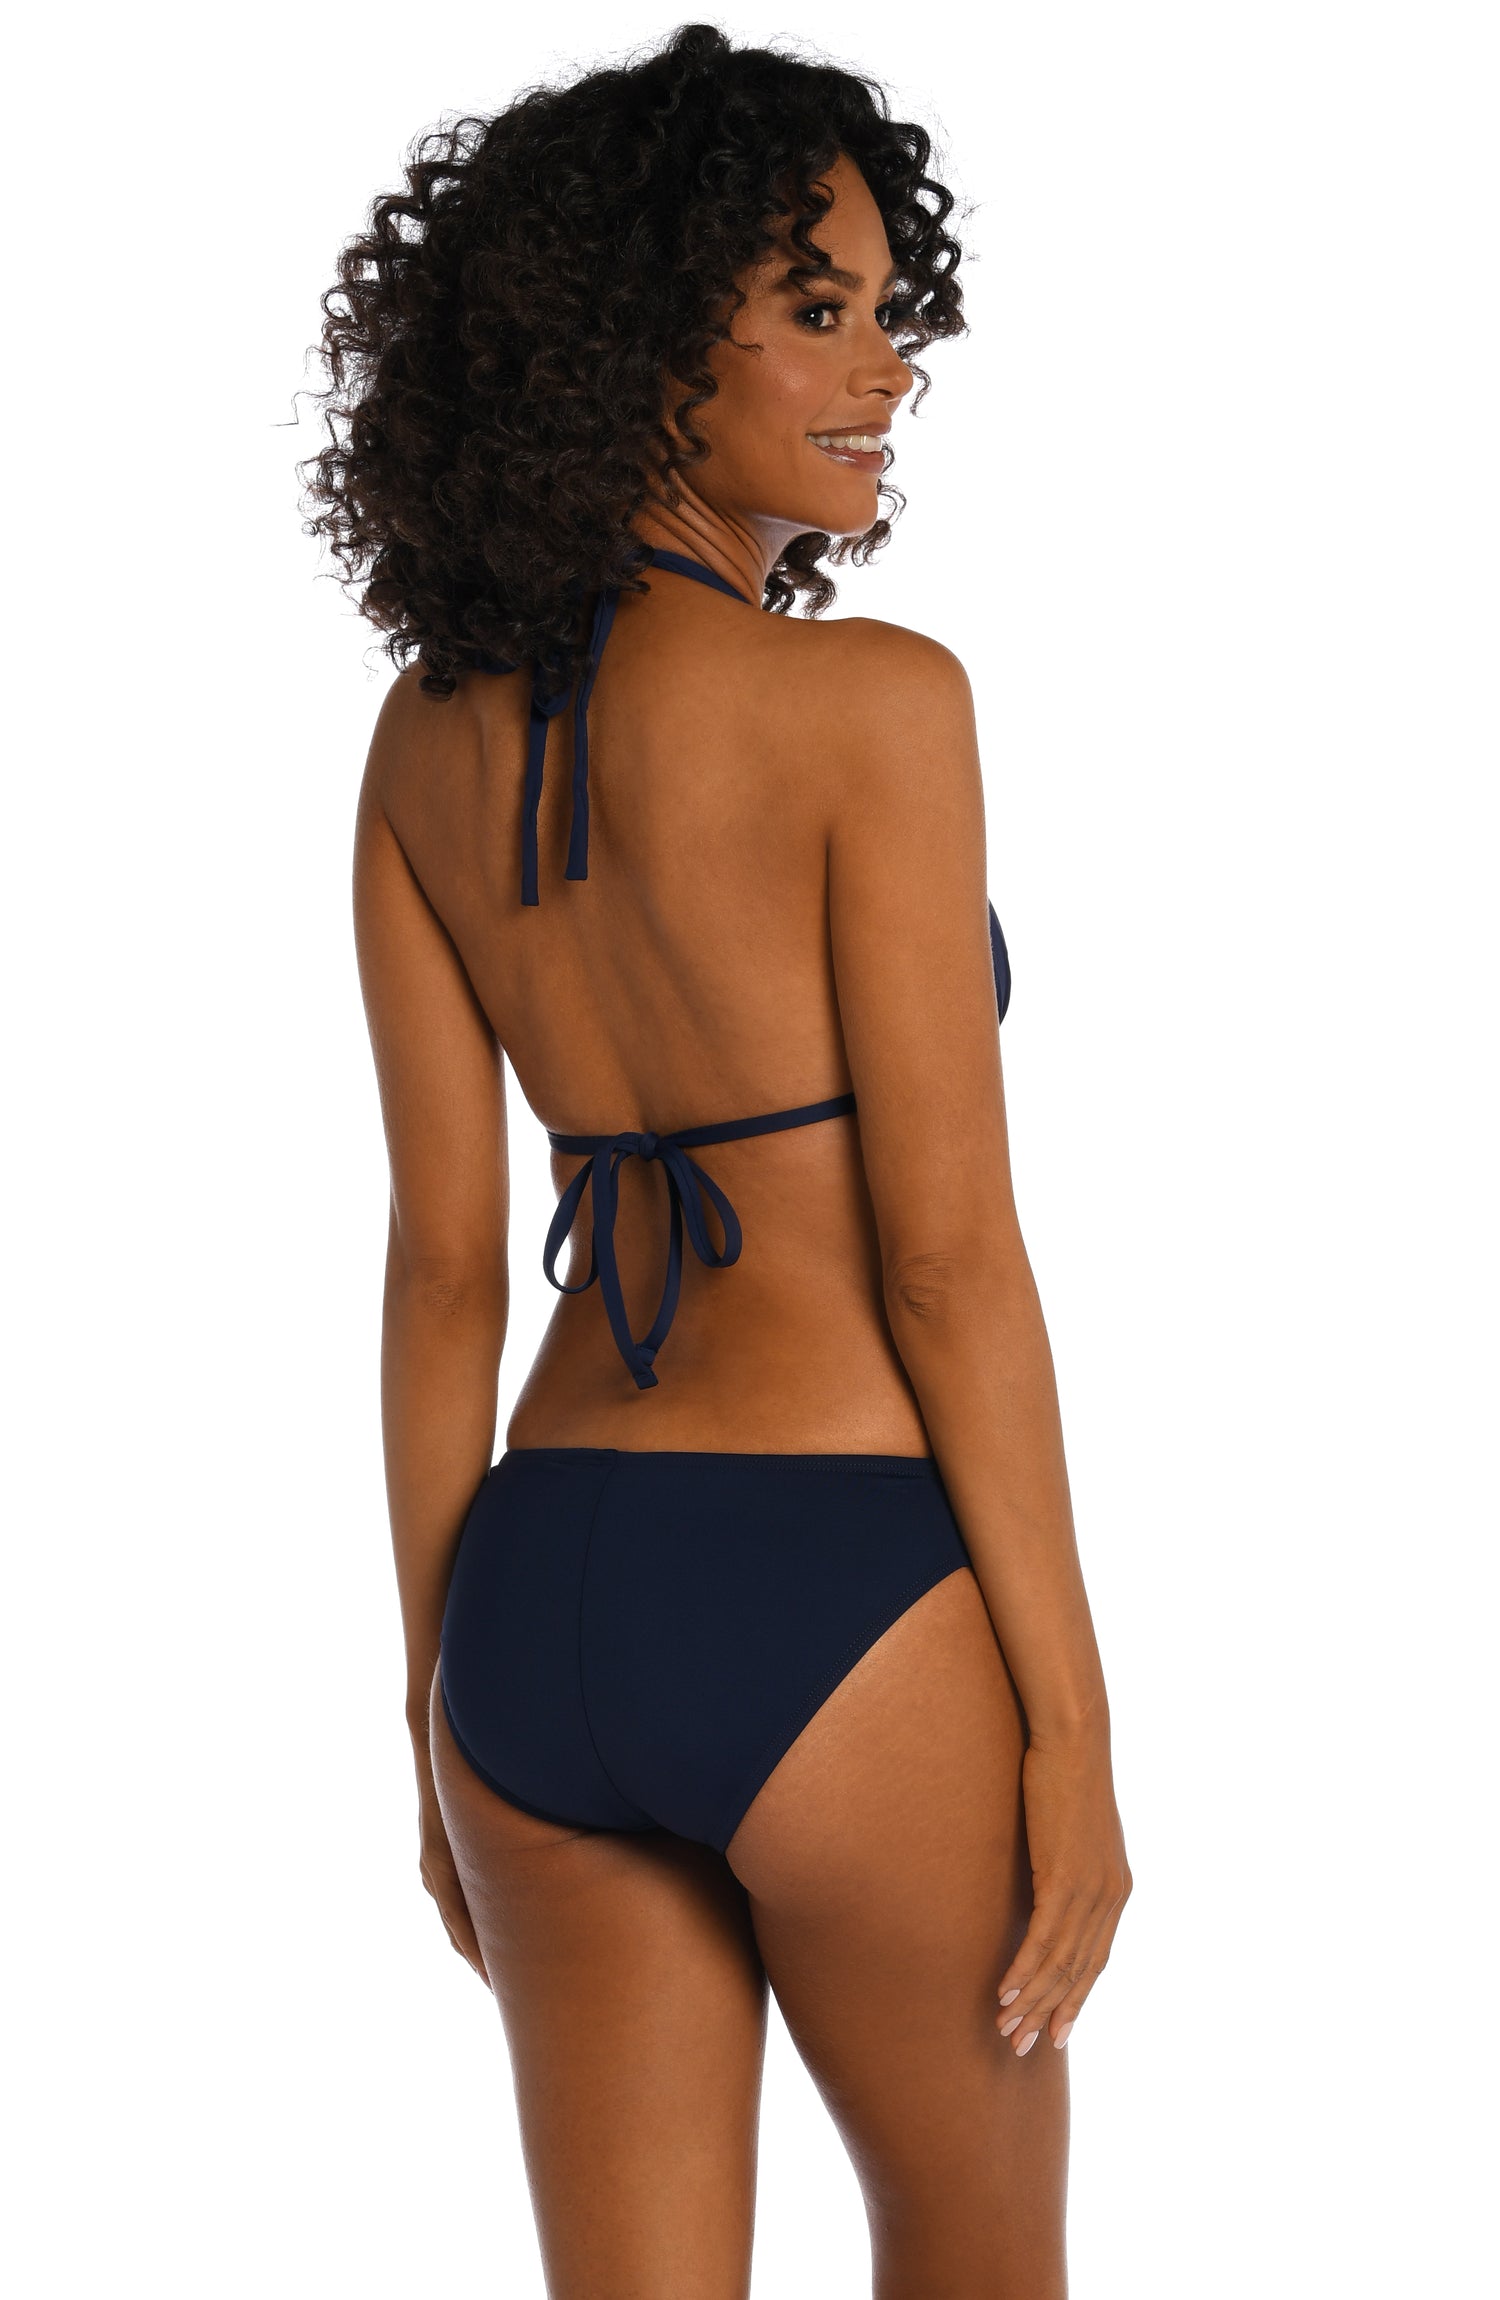 Model is wearing a indigo colored halter triangle swimsuit top from our Best-Selling Island Goddess collection.